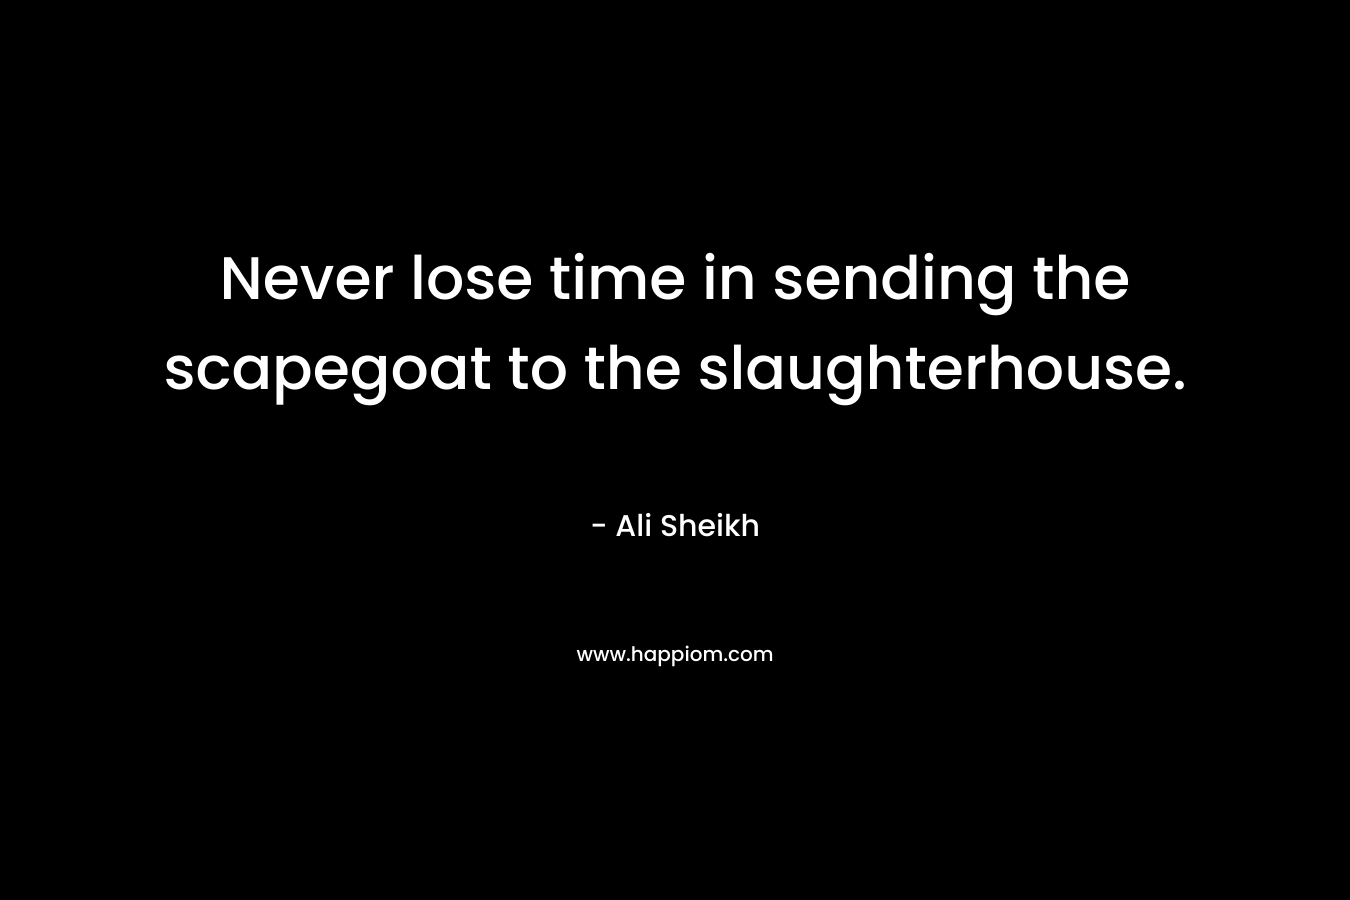 Never lose time in sending the scapegoat to the slaughterhouse.